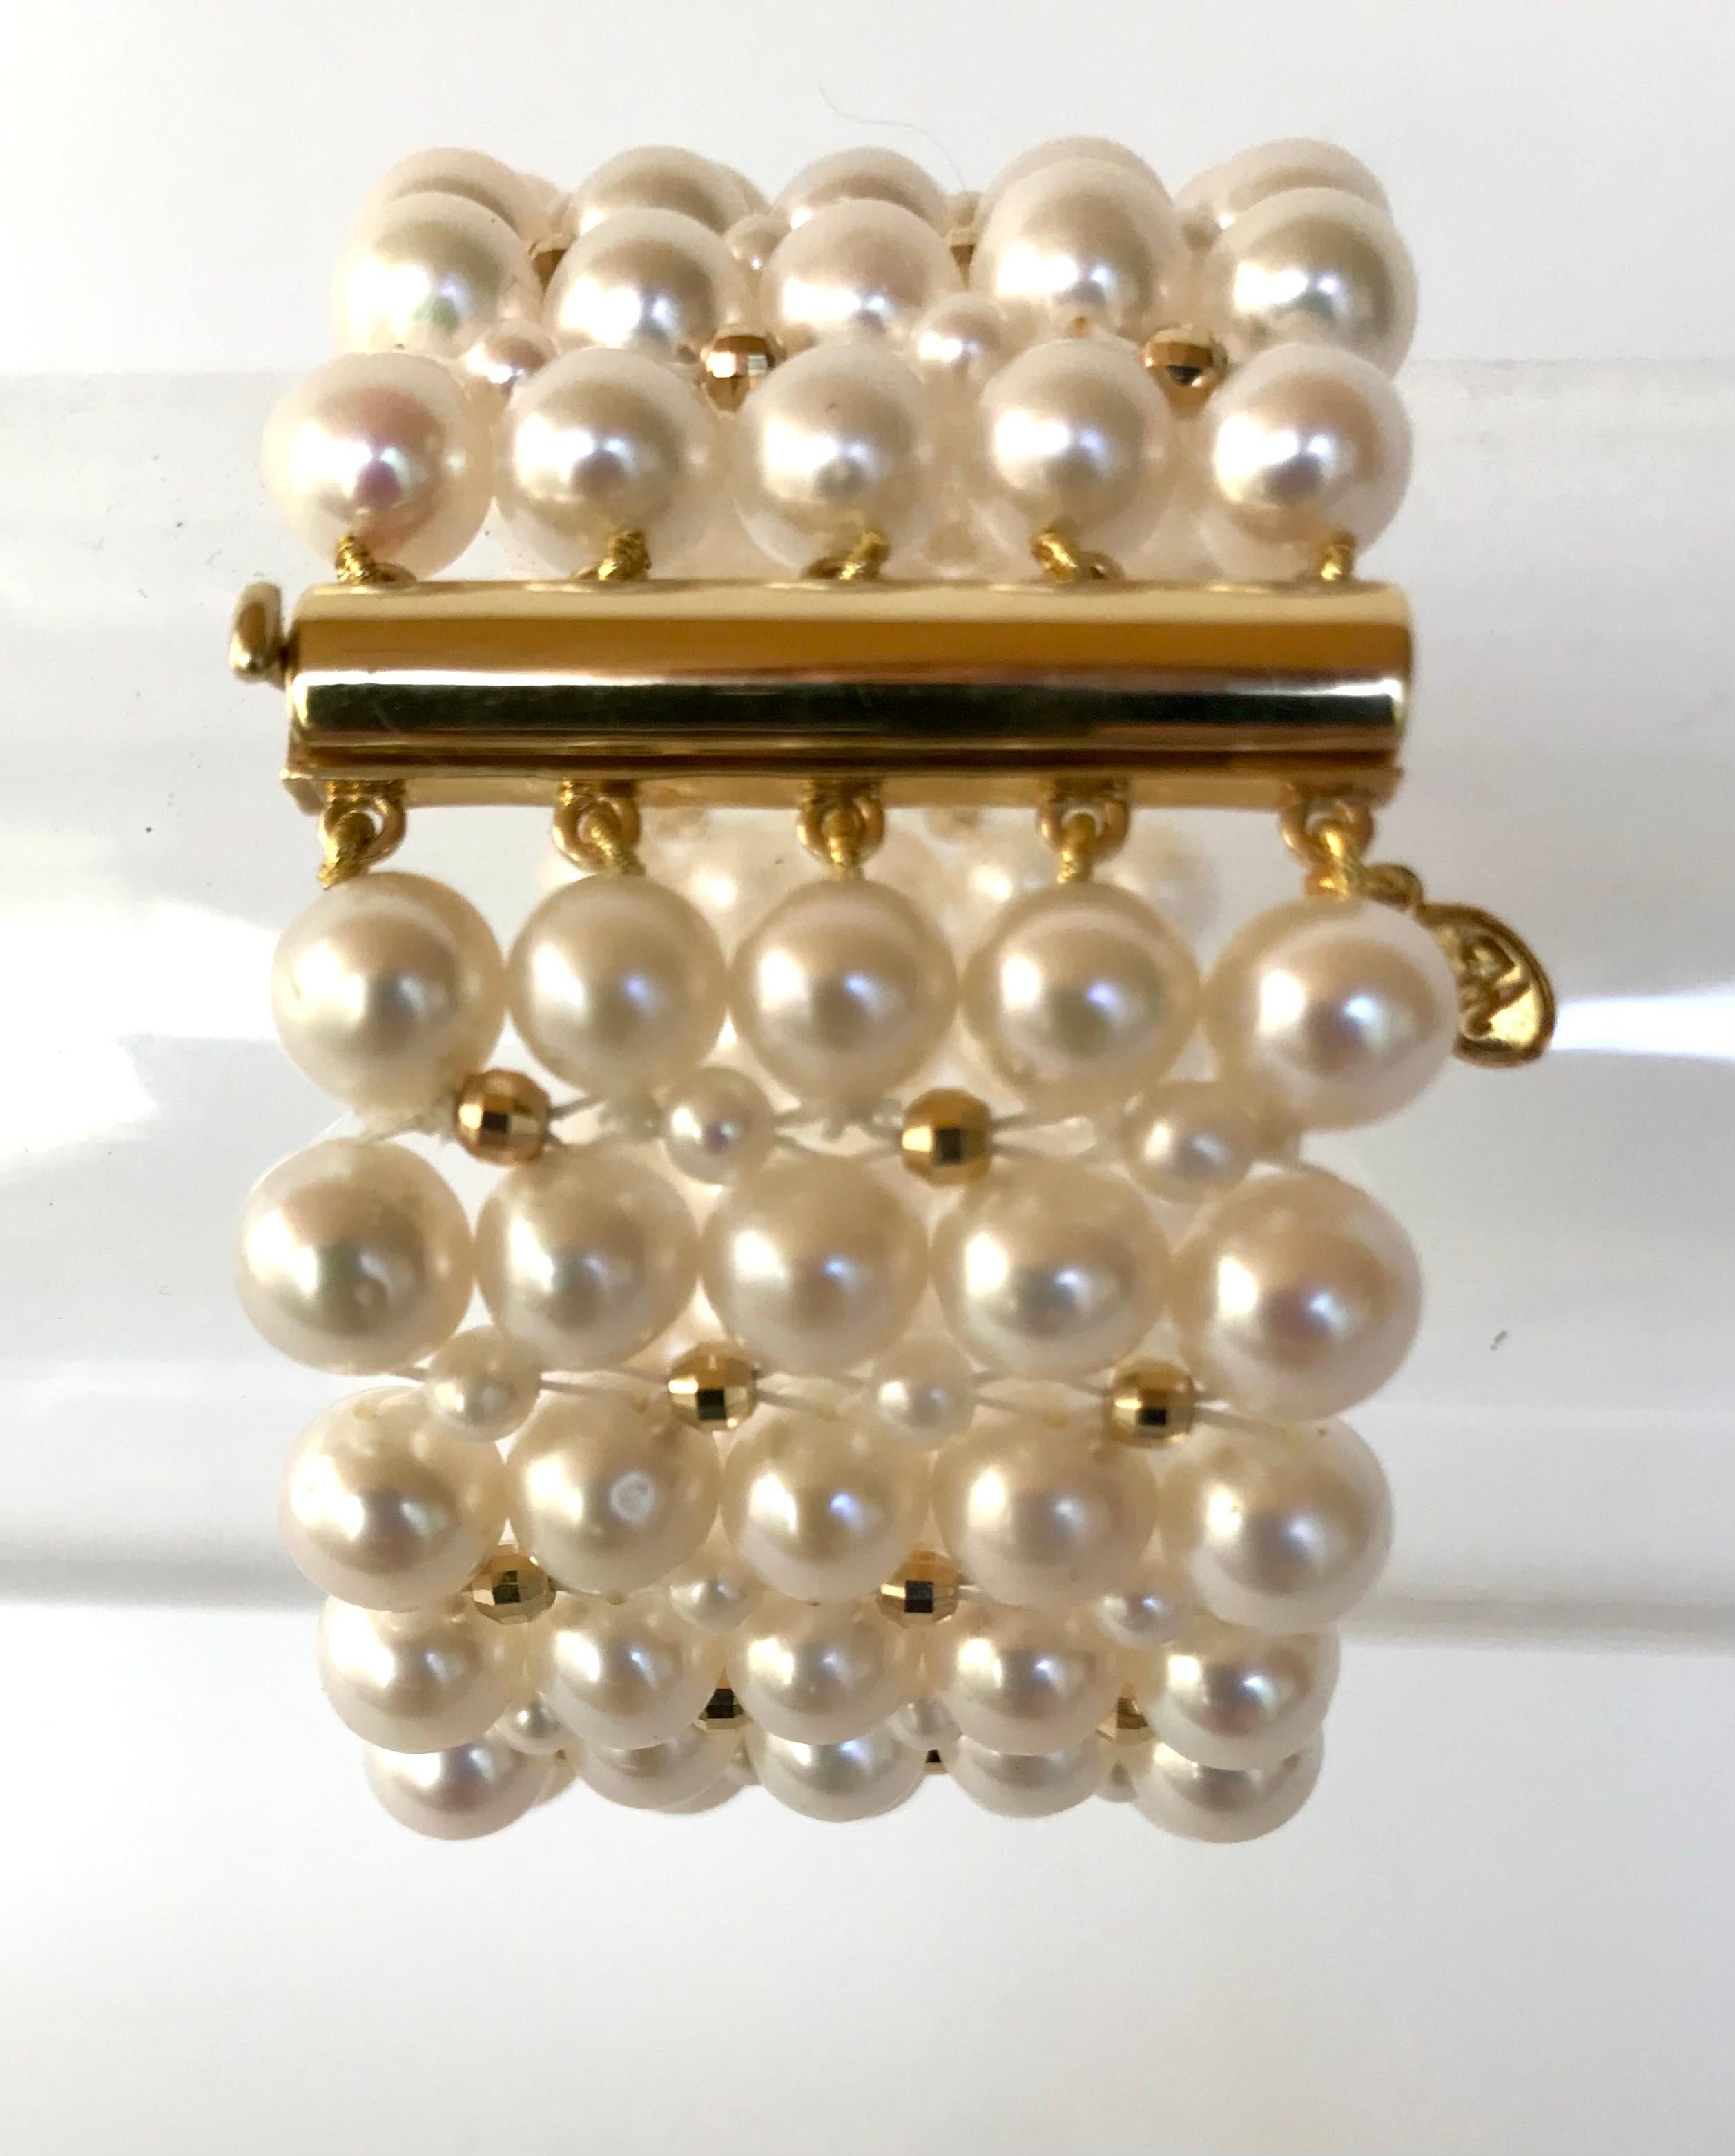 This timeless bracelet has an elegant pearl weave. At 1.5  inches wide the different size pearls create a checkered design with the 14 k yellow gold  faceted beads.
The bracelet is 7 inches and fits comfortably on the wrist like a band. The sliding